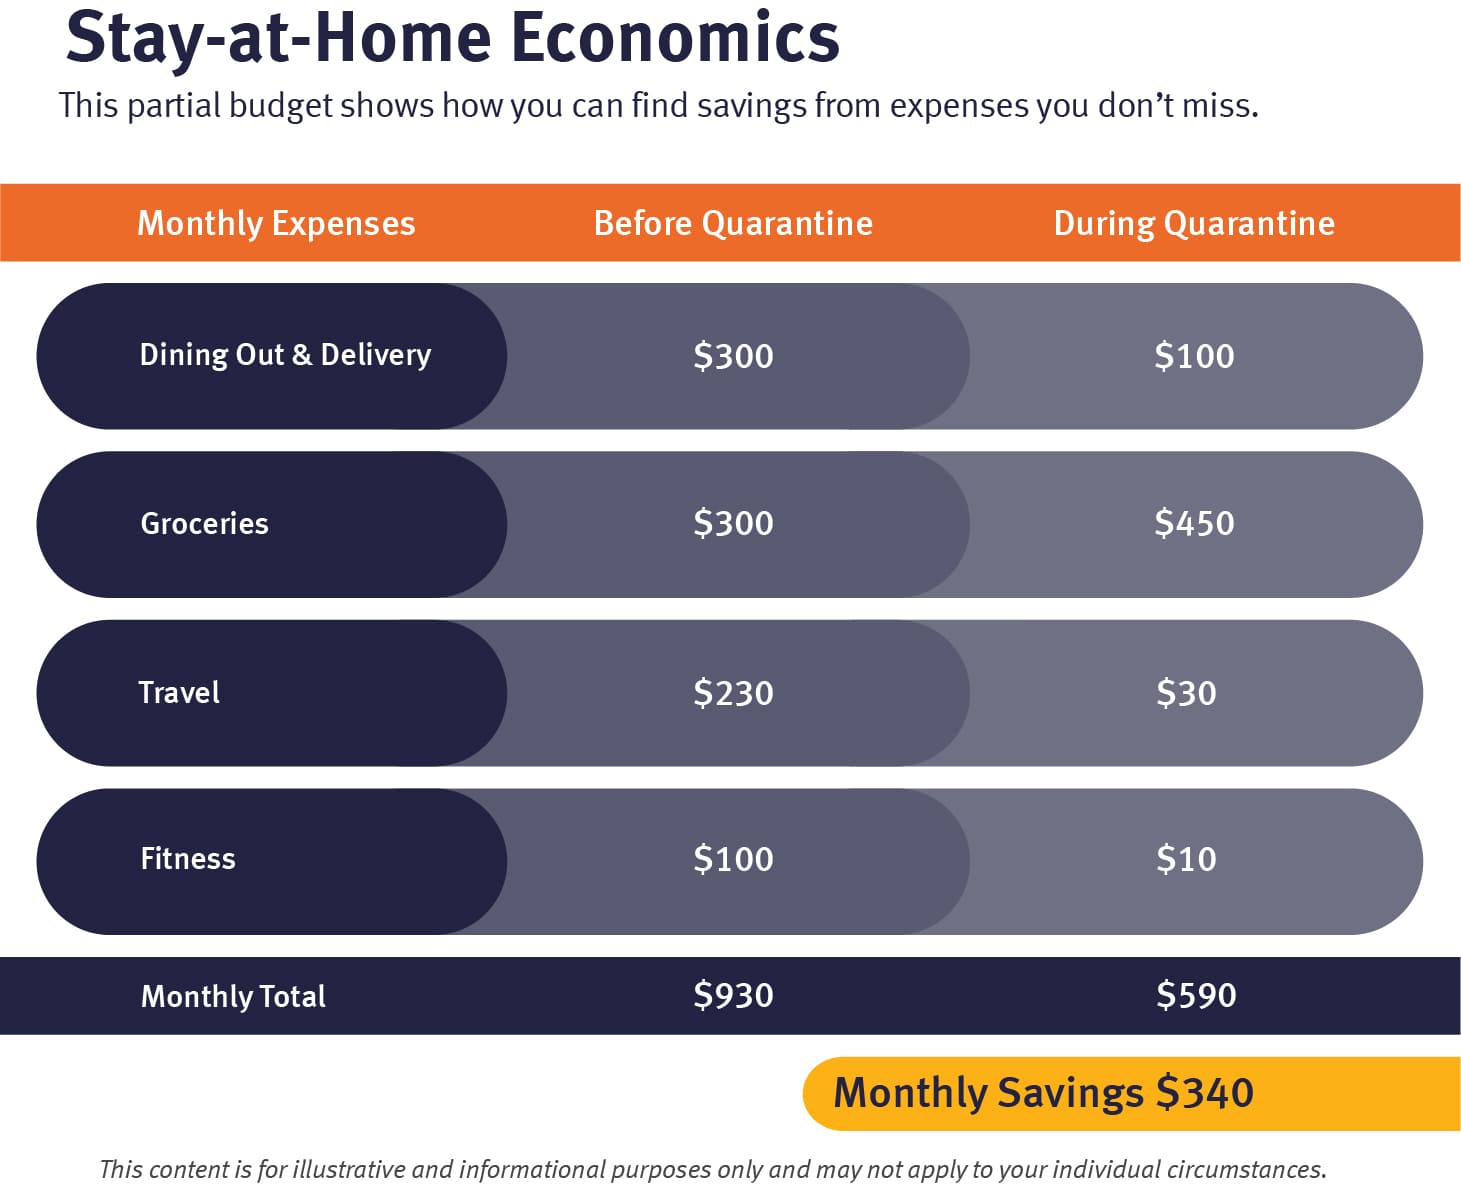 When creating a household budget, look for savings from expenses you don't miss in quarantine.